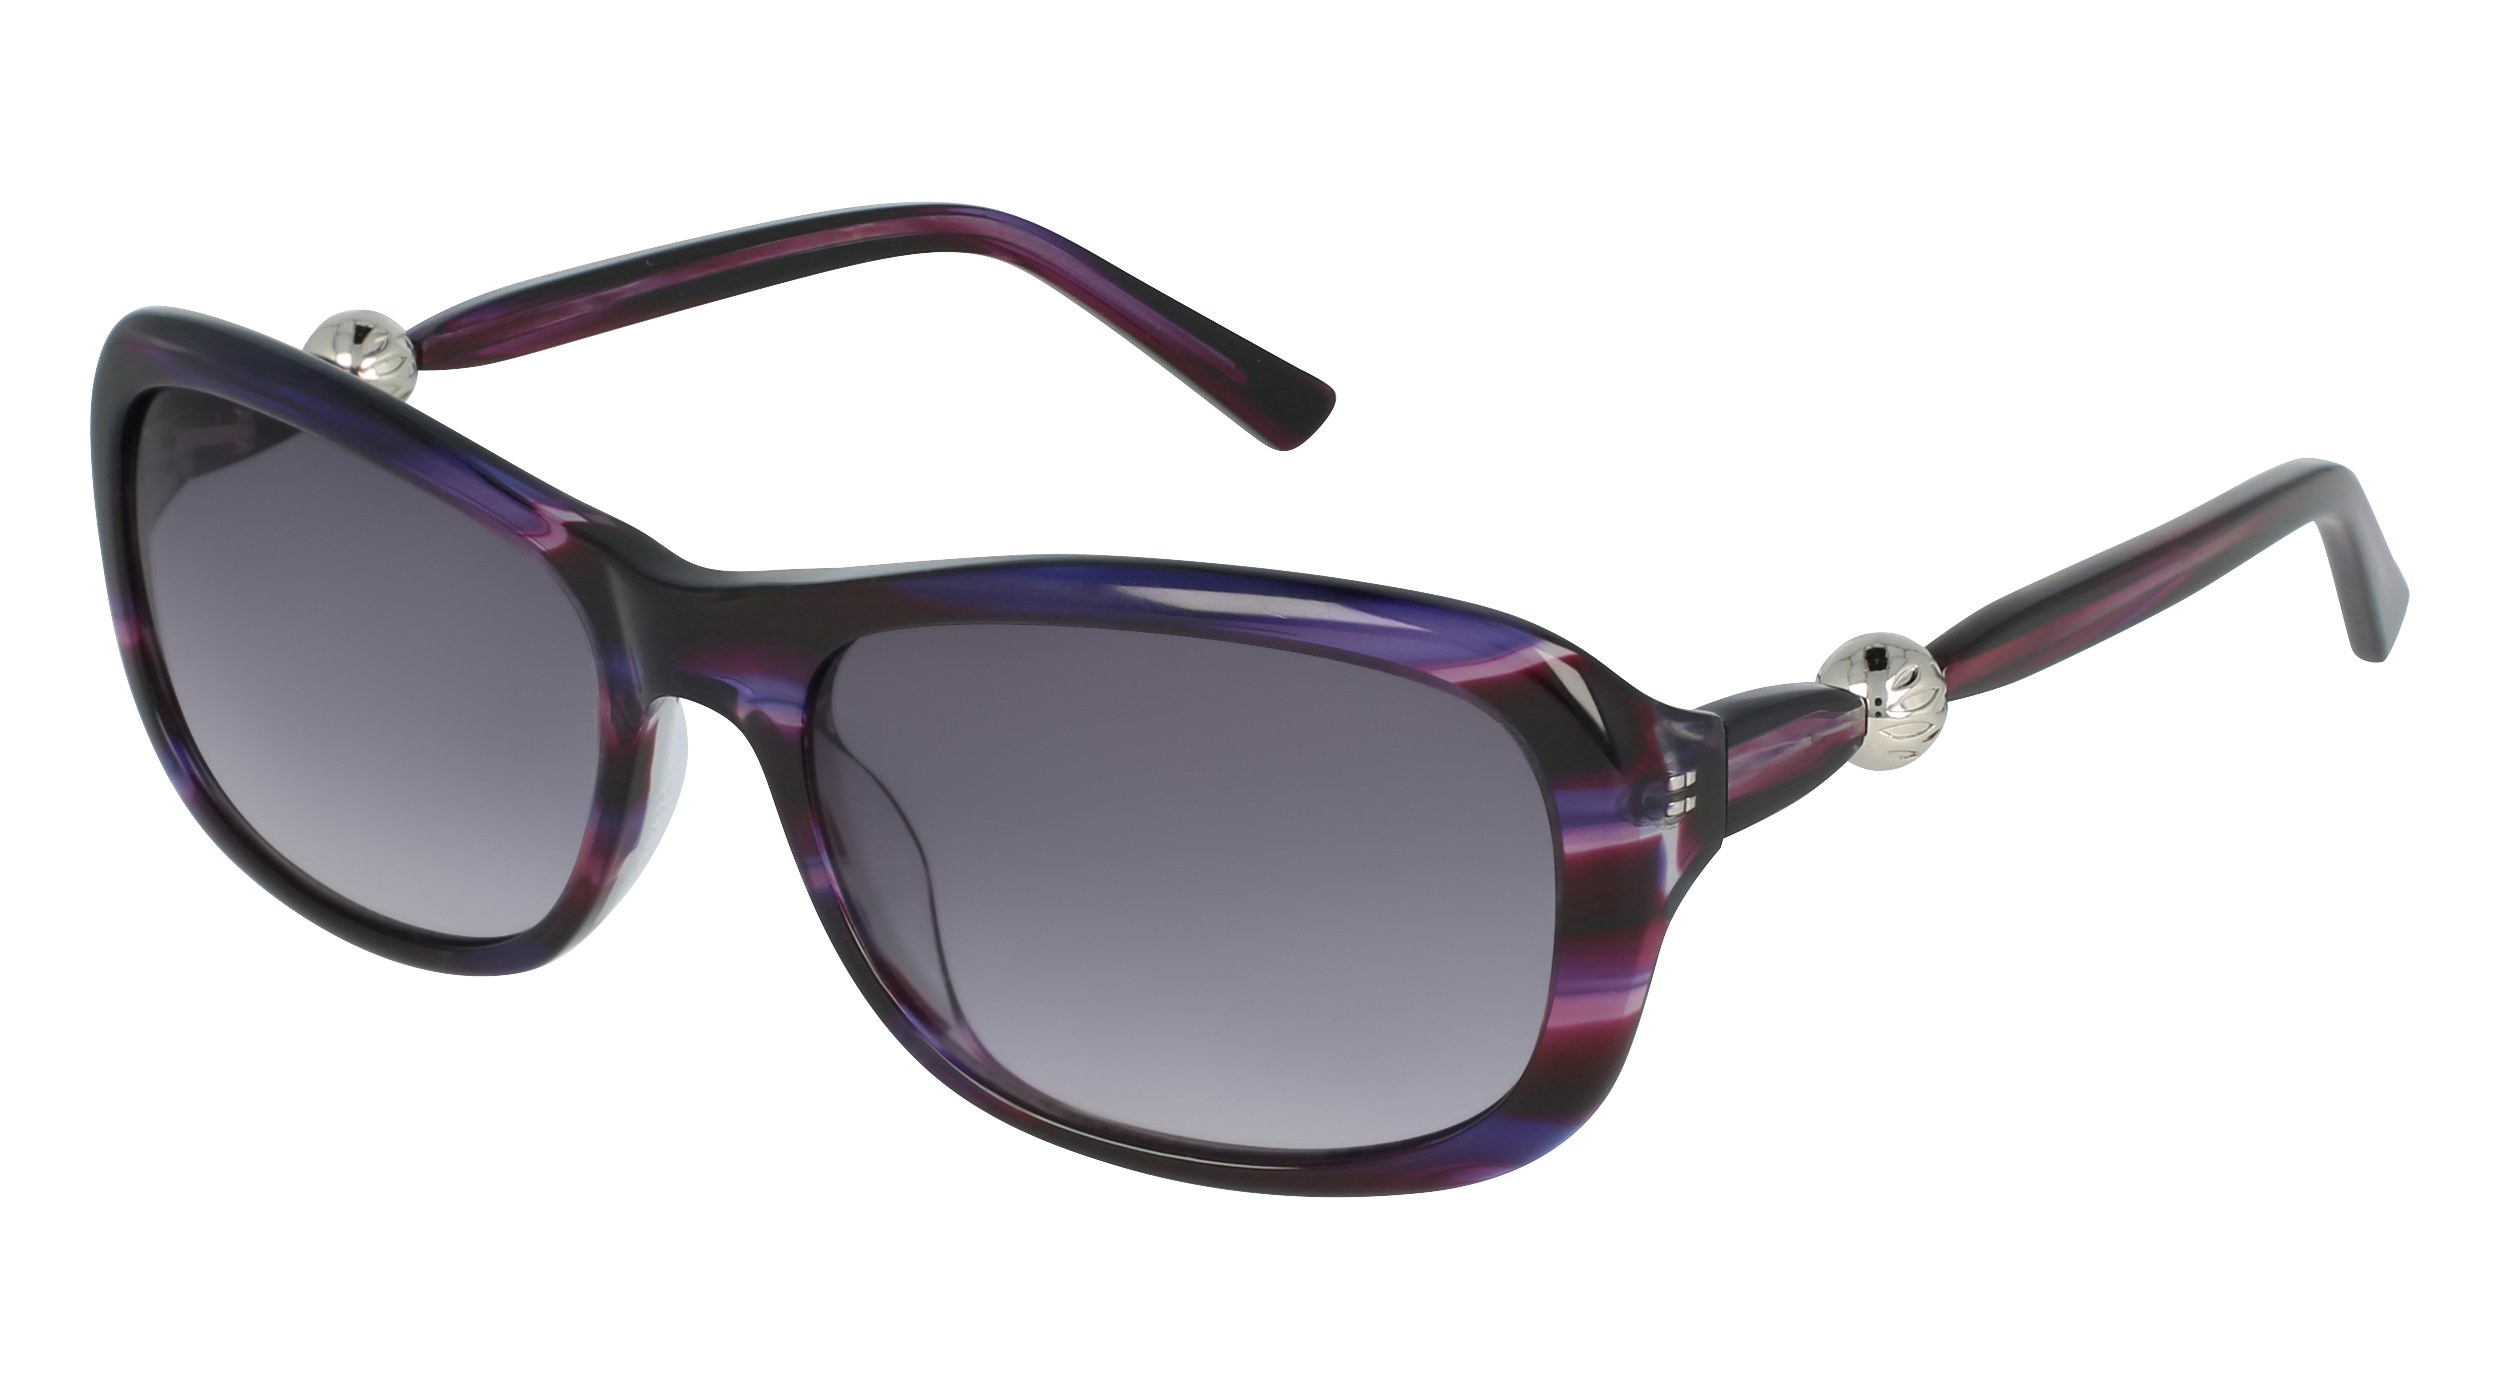 R S 722 women's sunglasses (from the side)